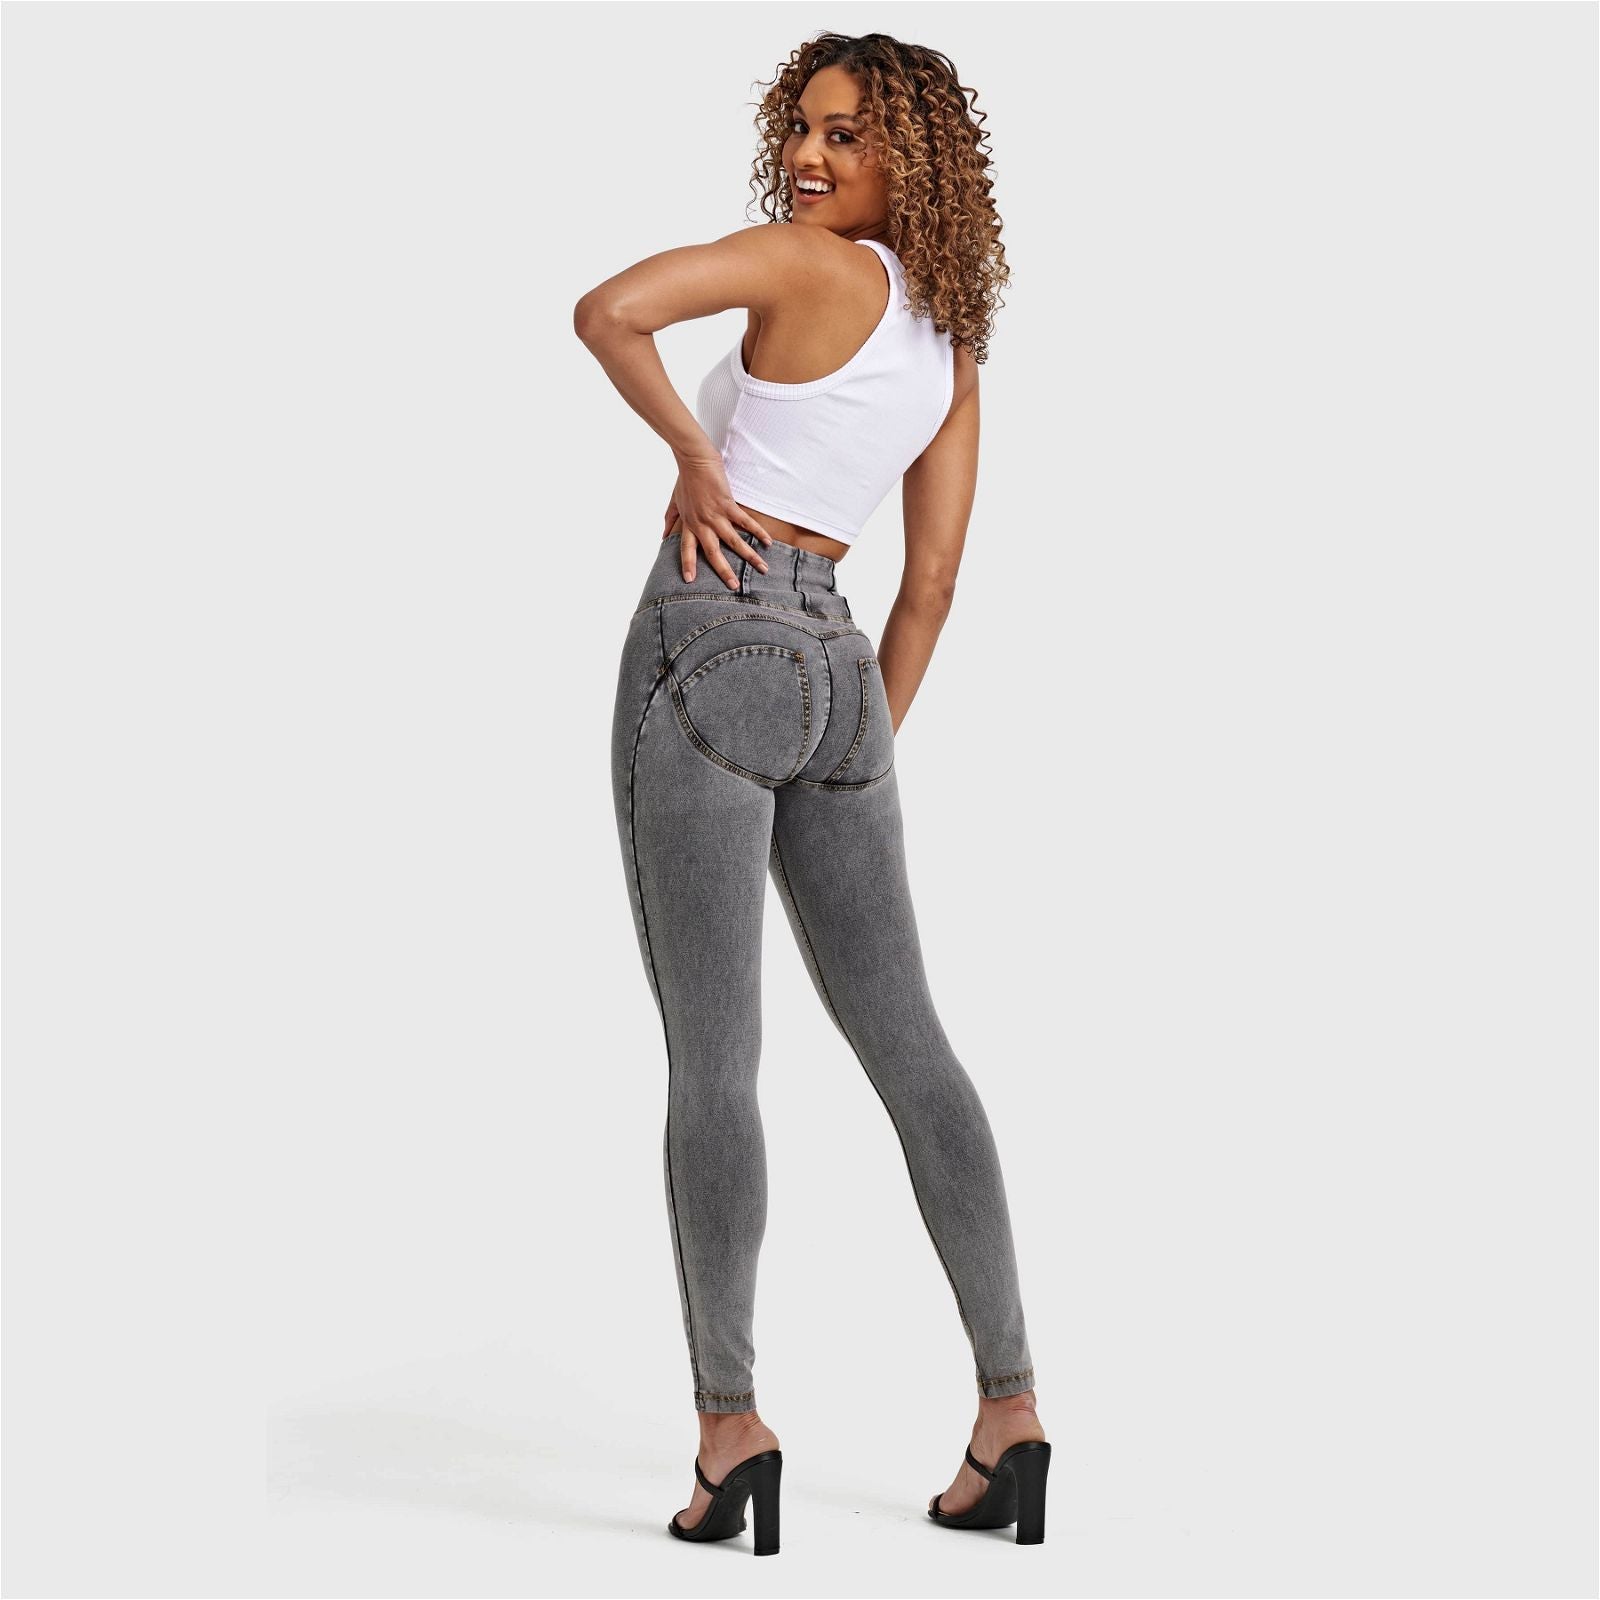 WR.UP® Denim - High Waisted - Full Length - Grey + Yellow Stitching 2